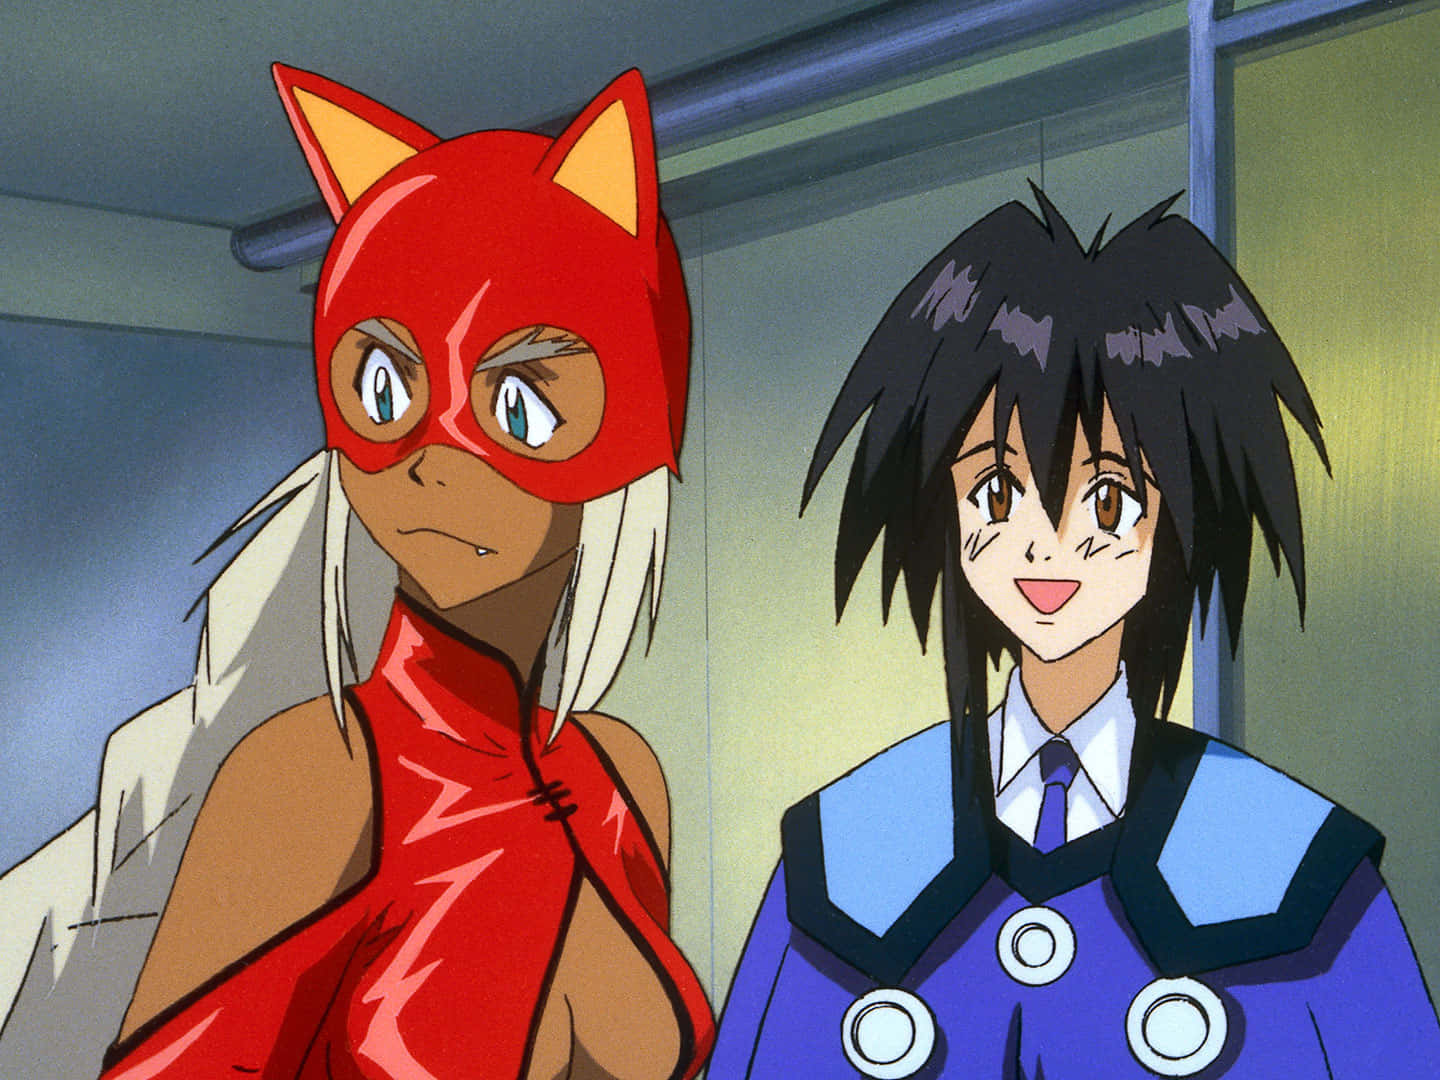 Join the crew of the Outlaw Star on their epic adventure! Wallpaper